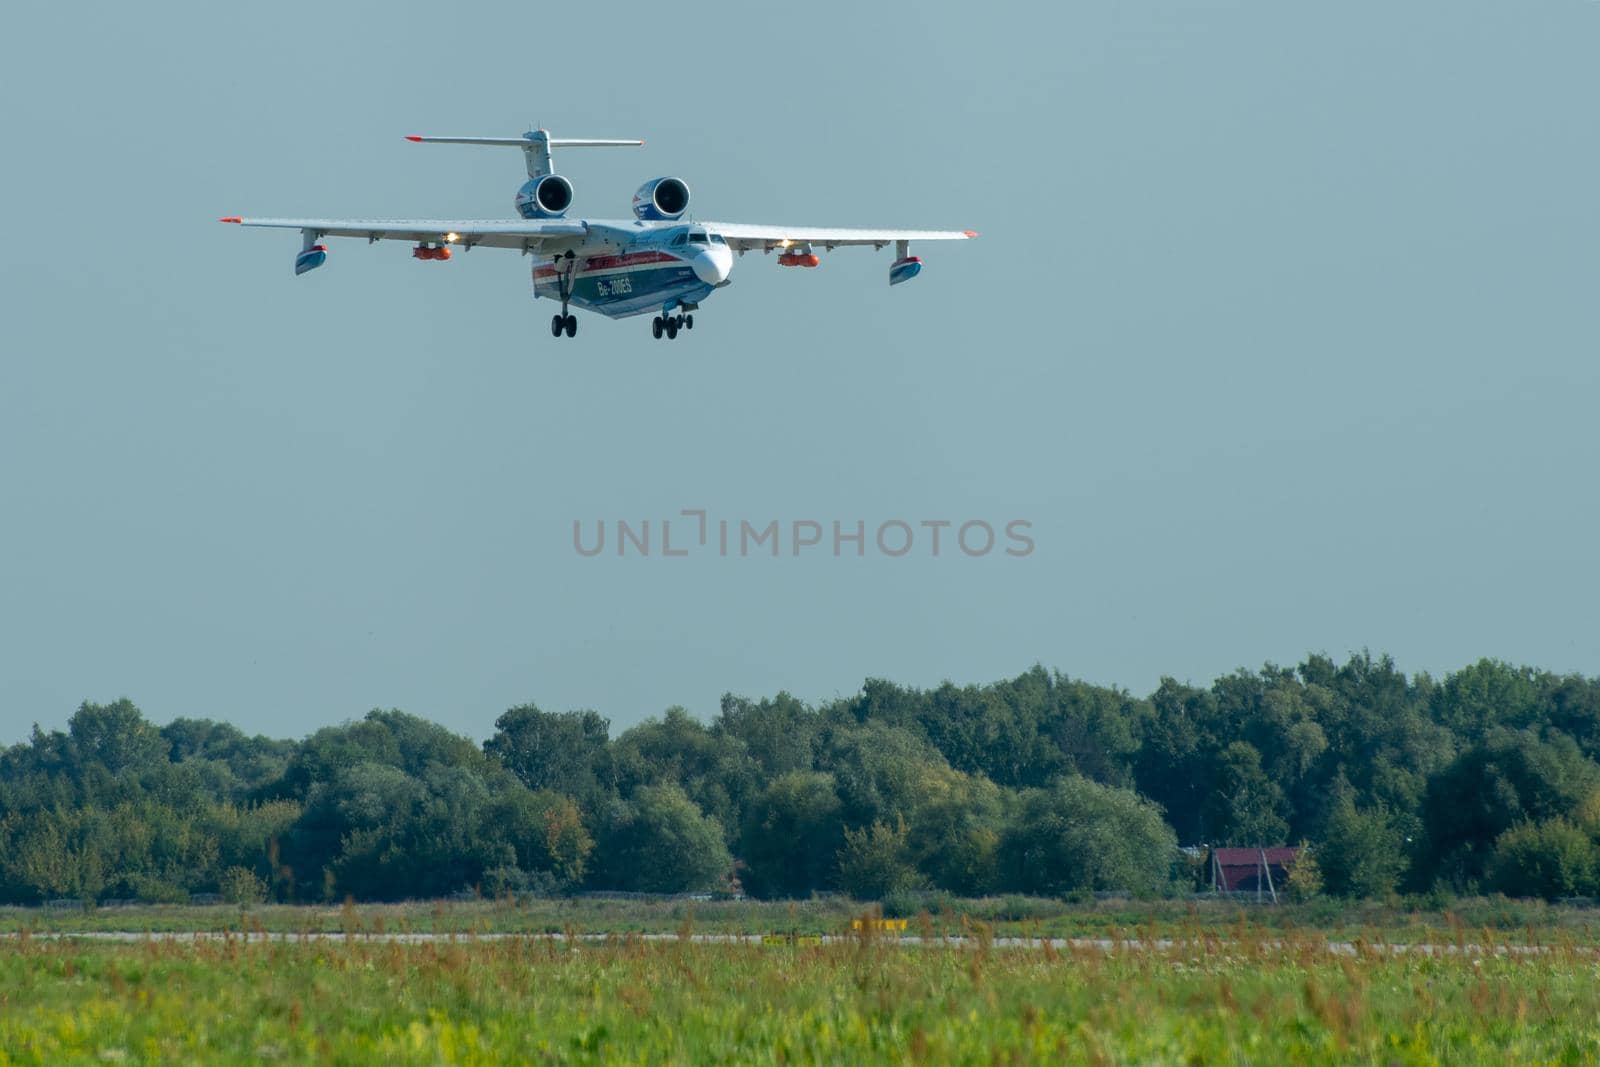 August 30, 2019. Zhukovsky, Russia. Multipurpose amphibious aircraft Beriev Be-200 Altair  at the International Aviation and Space Salon MAKS 2019.